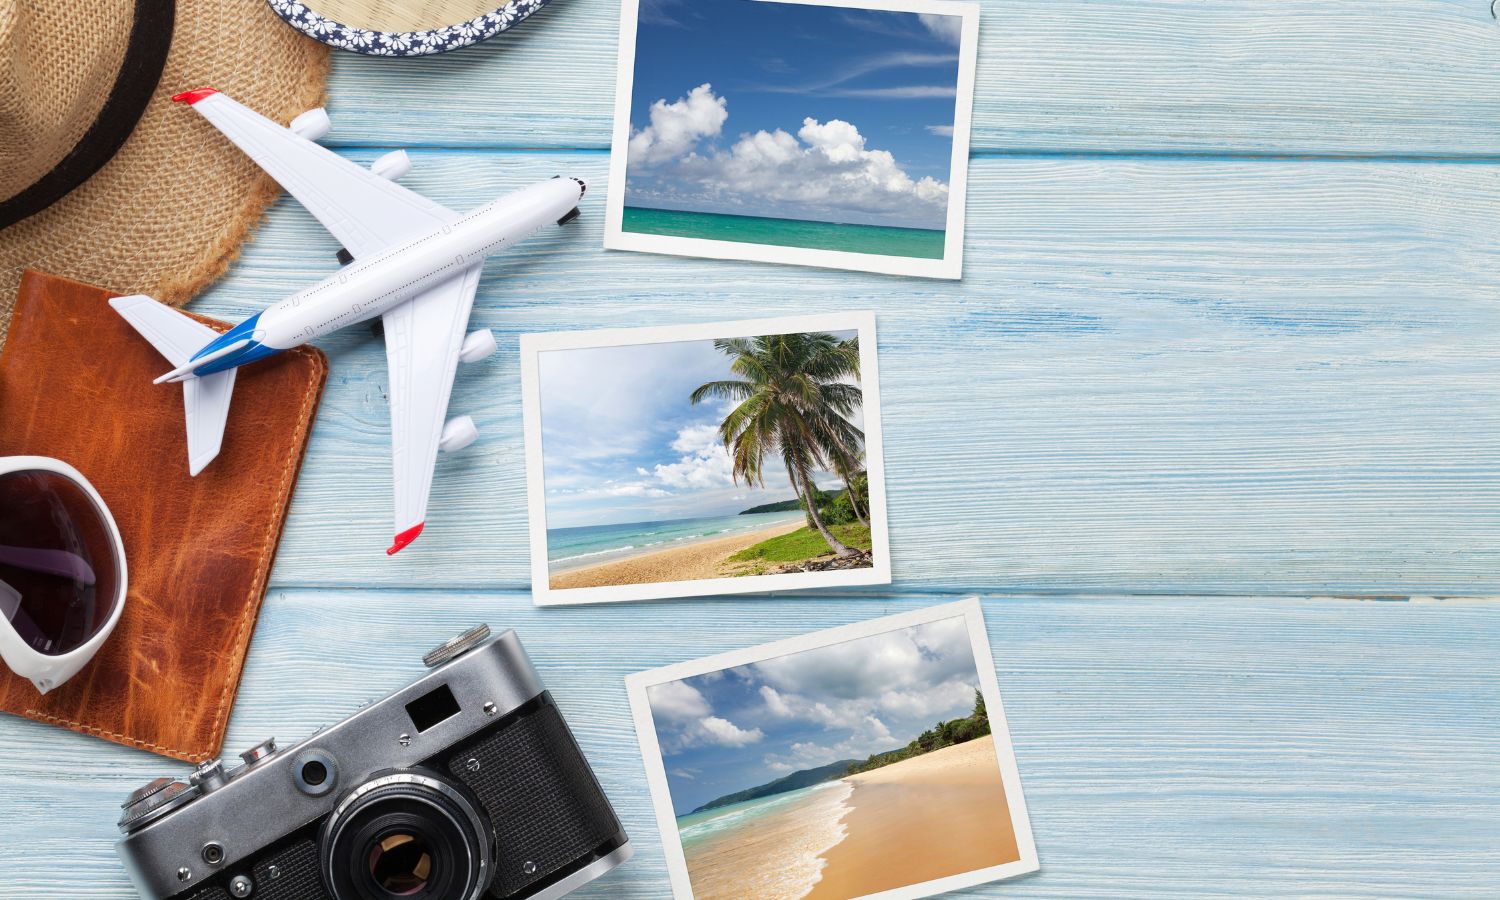 5 Tips to Make Your Vacation the Best It Can Be